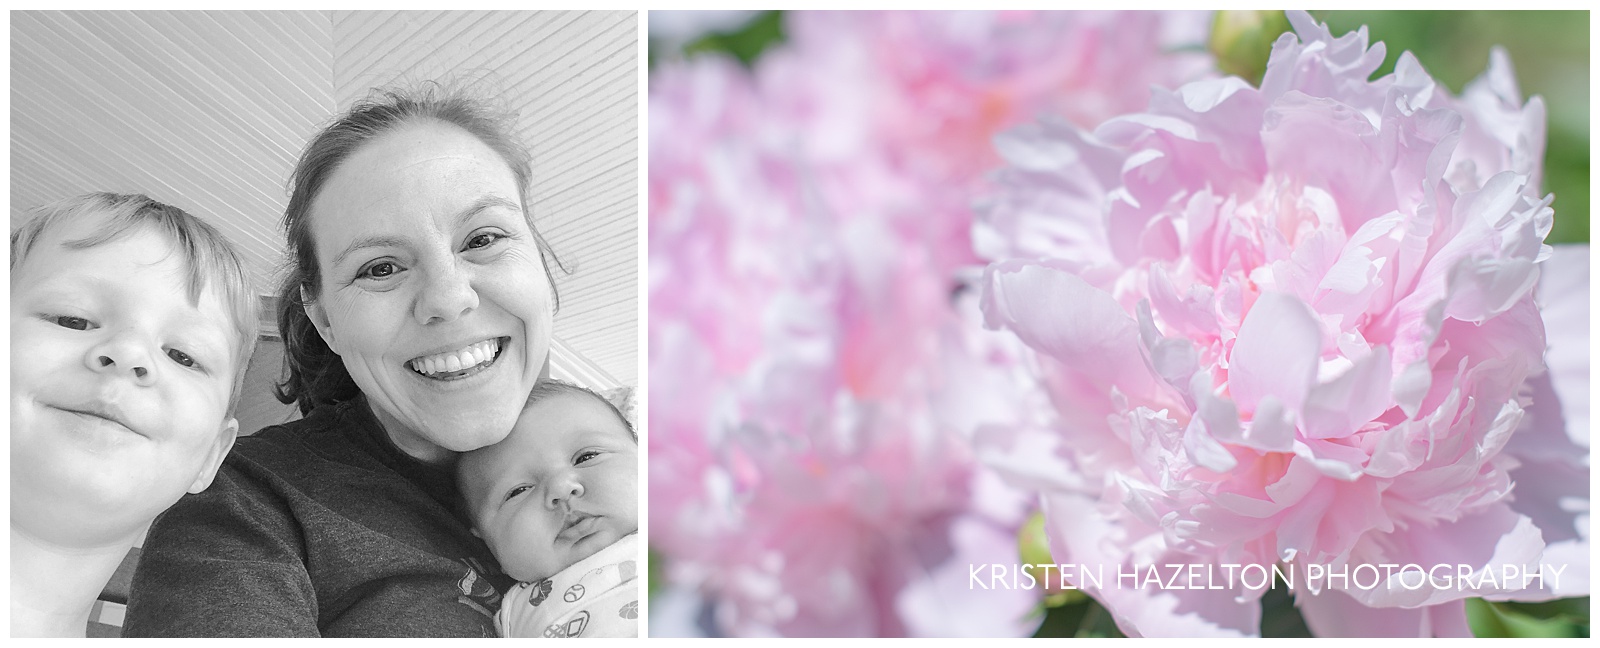 Pink peonies and woman with two small children taking a selfie